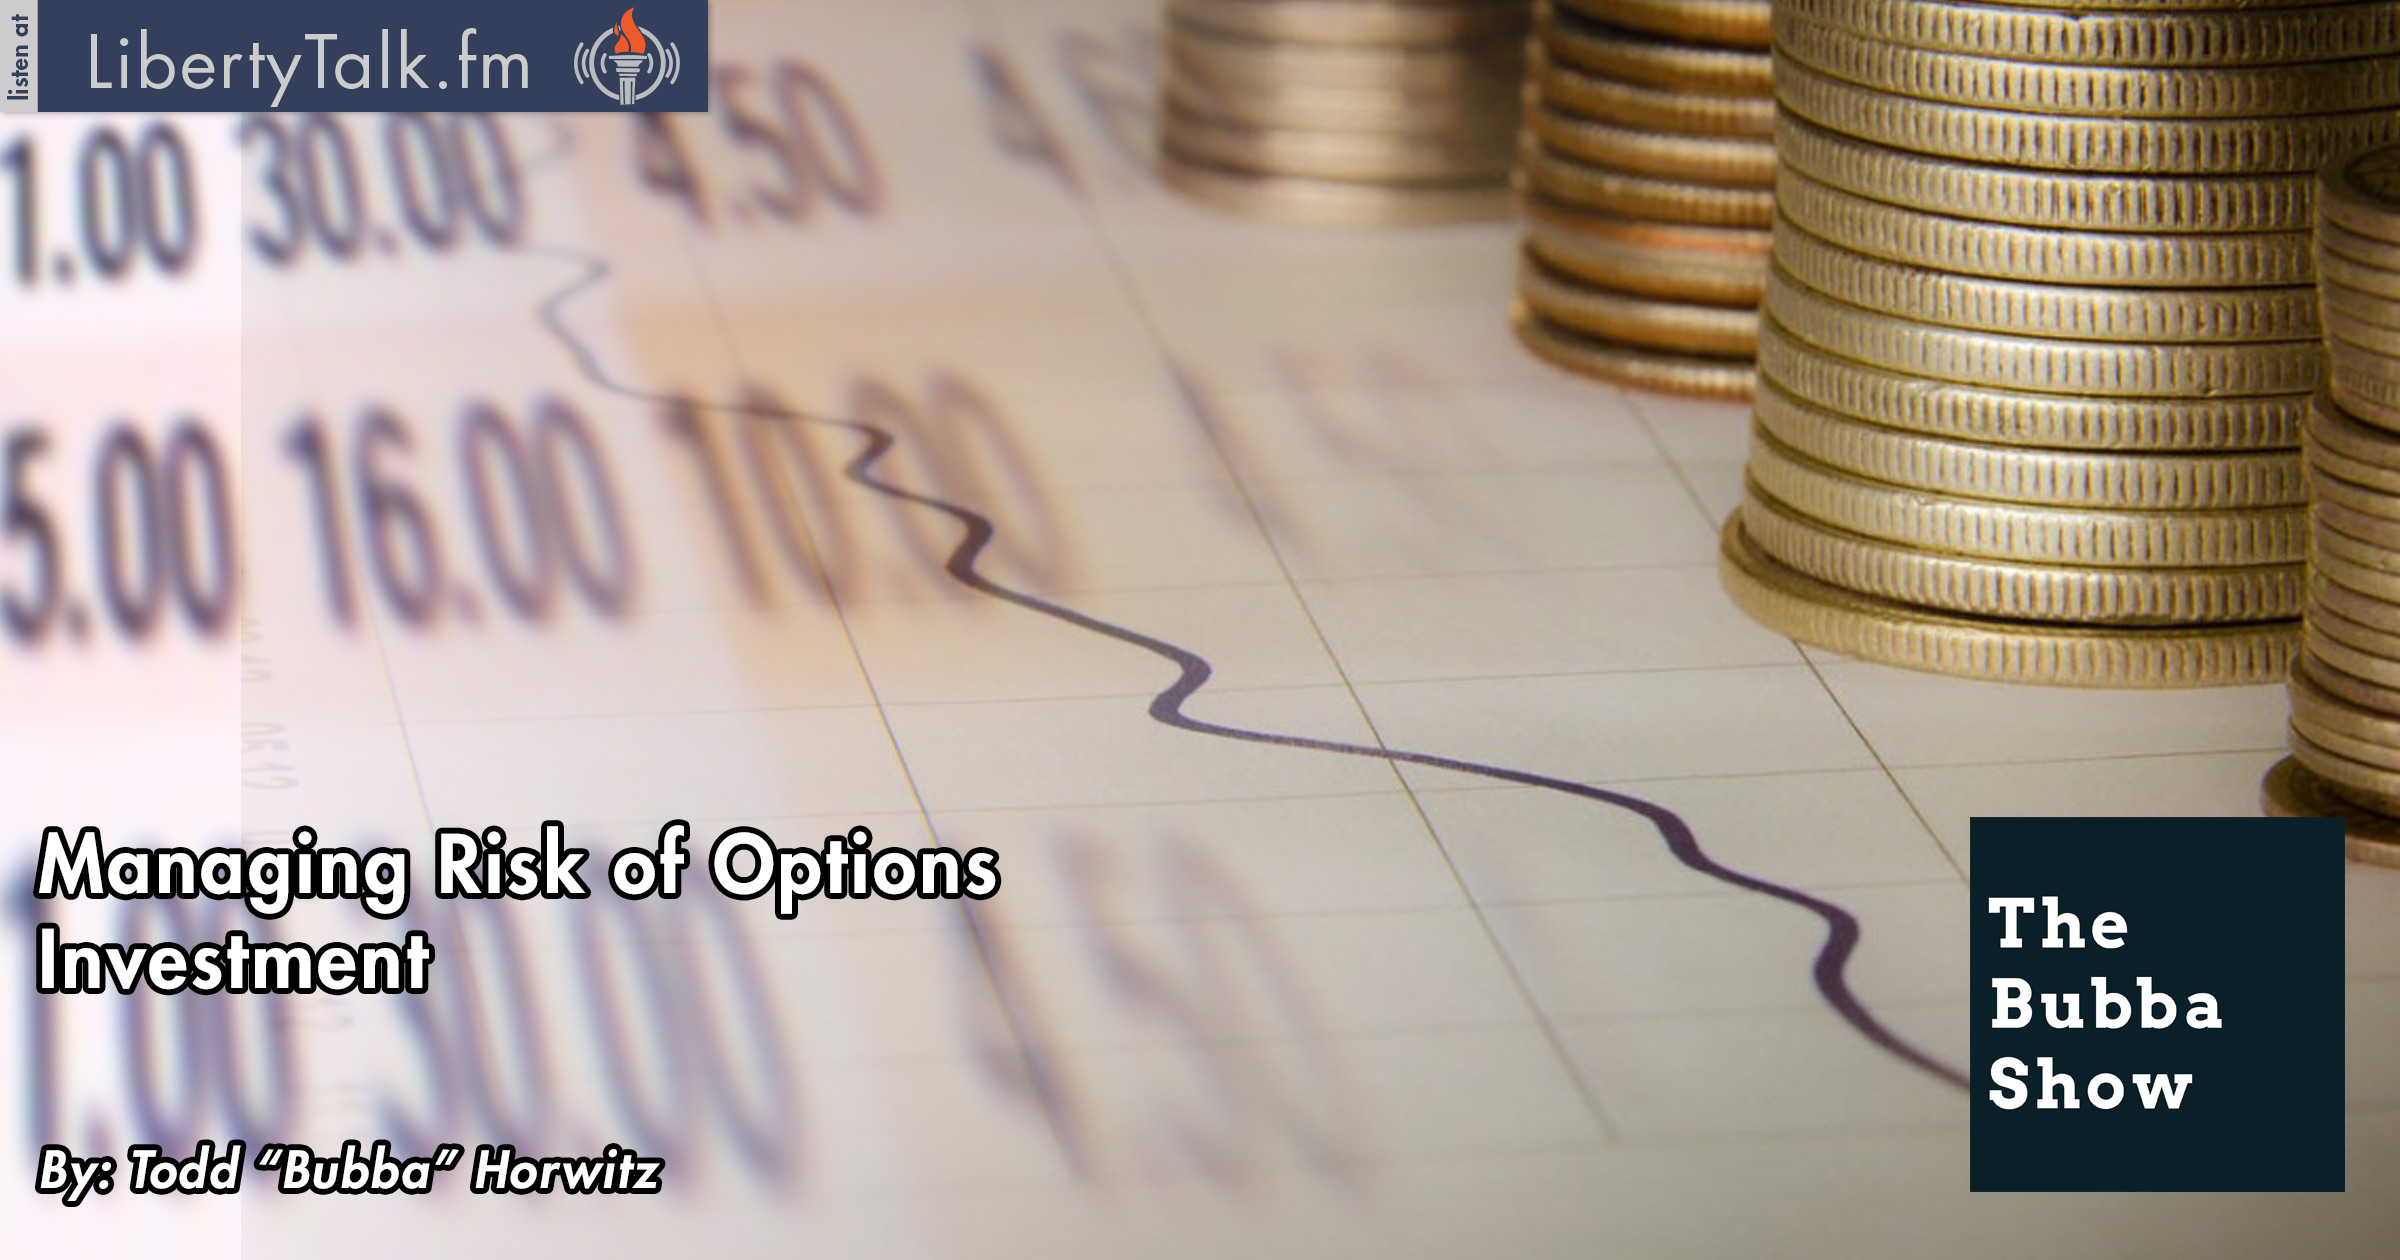 Options investment and risk management